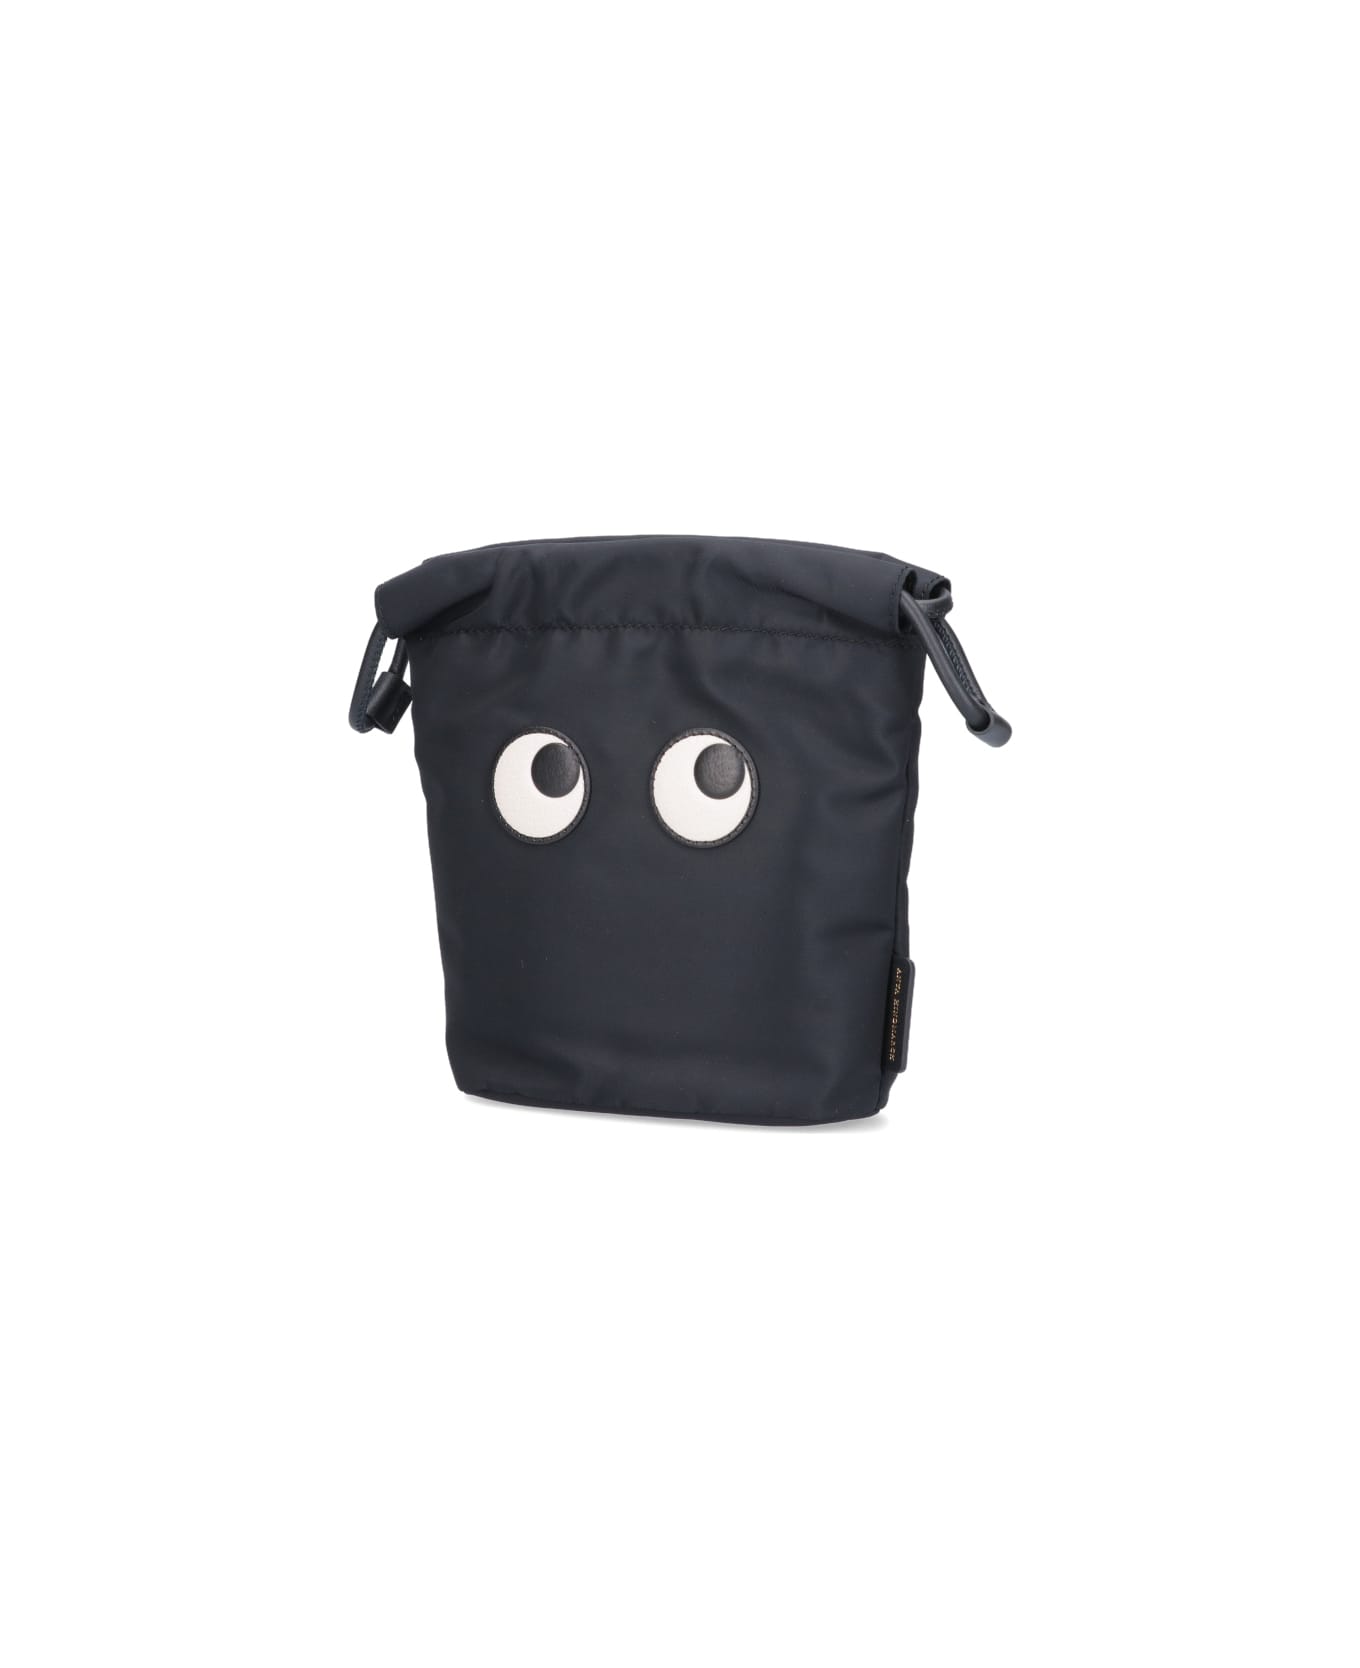 Anya Hindmarch 'eyes' Pouch - Black クラッチバッグ